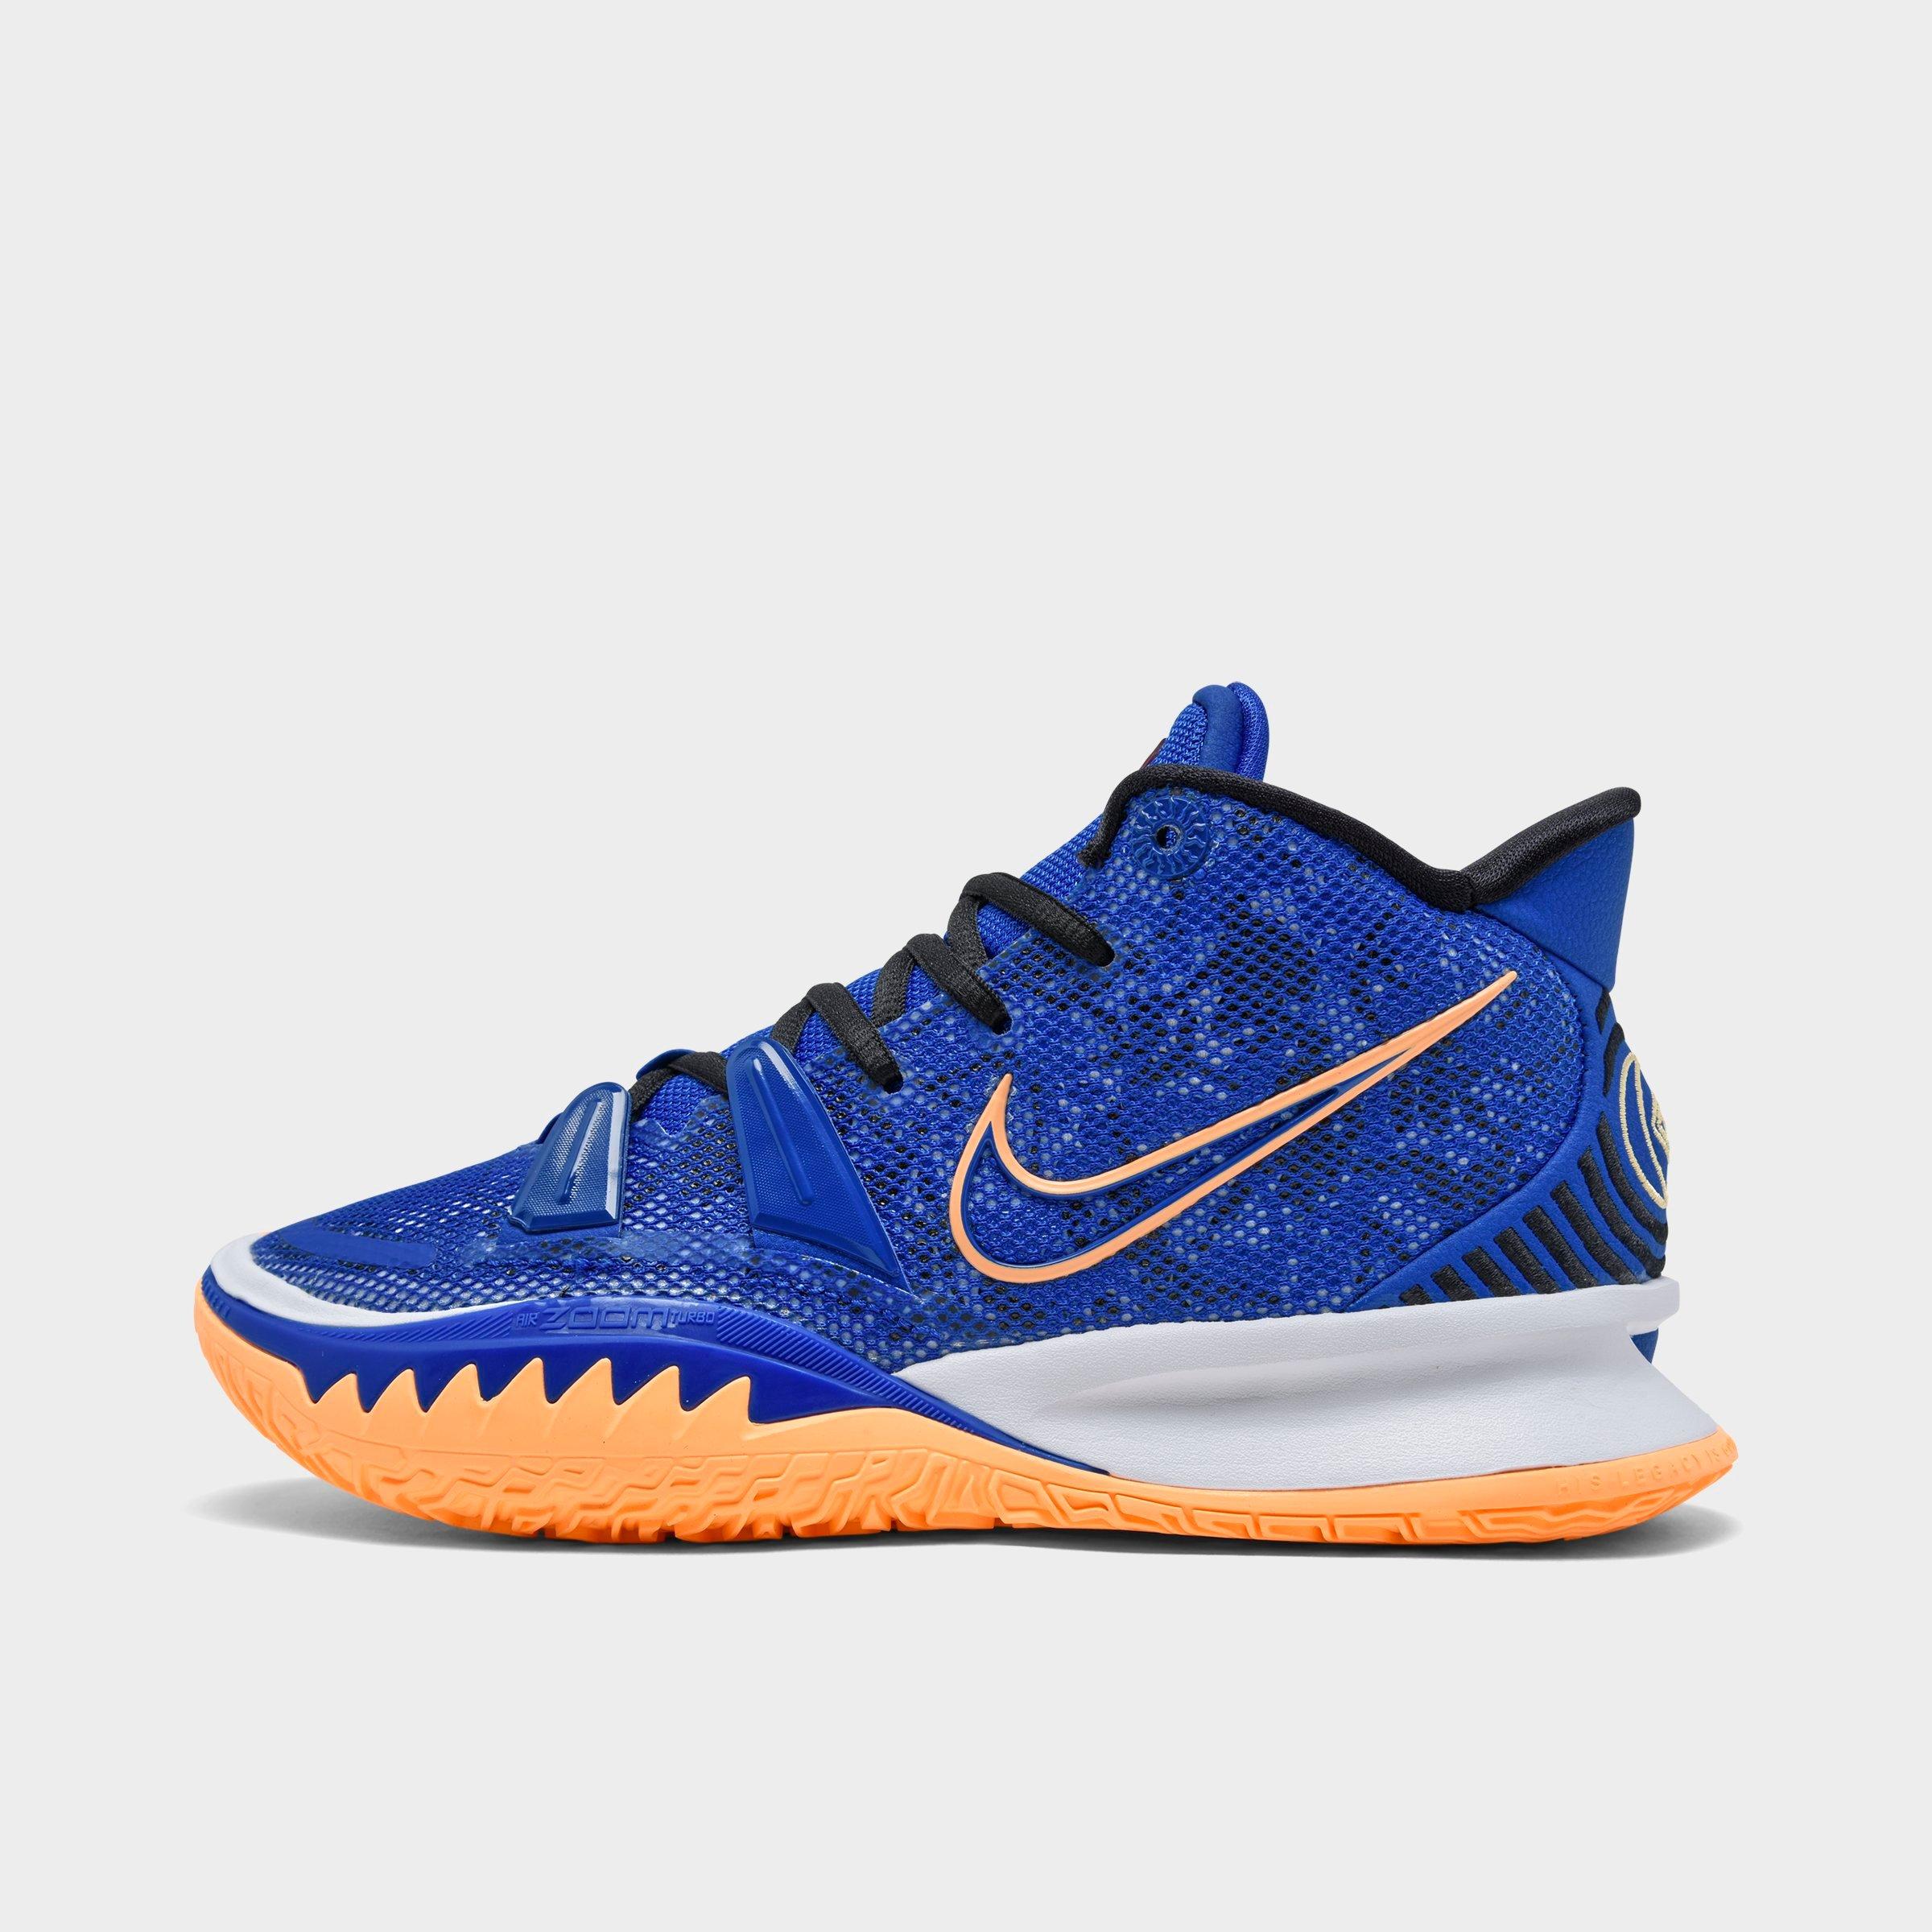 kyrie game 7 shoes